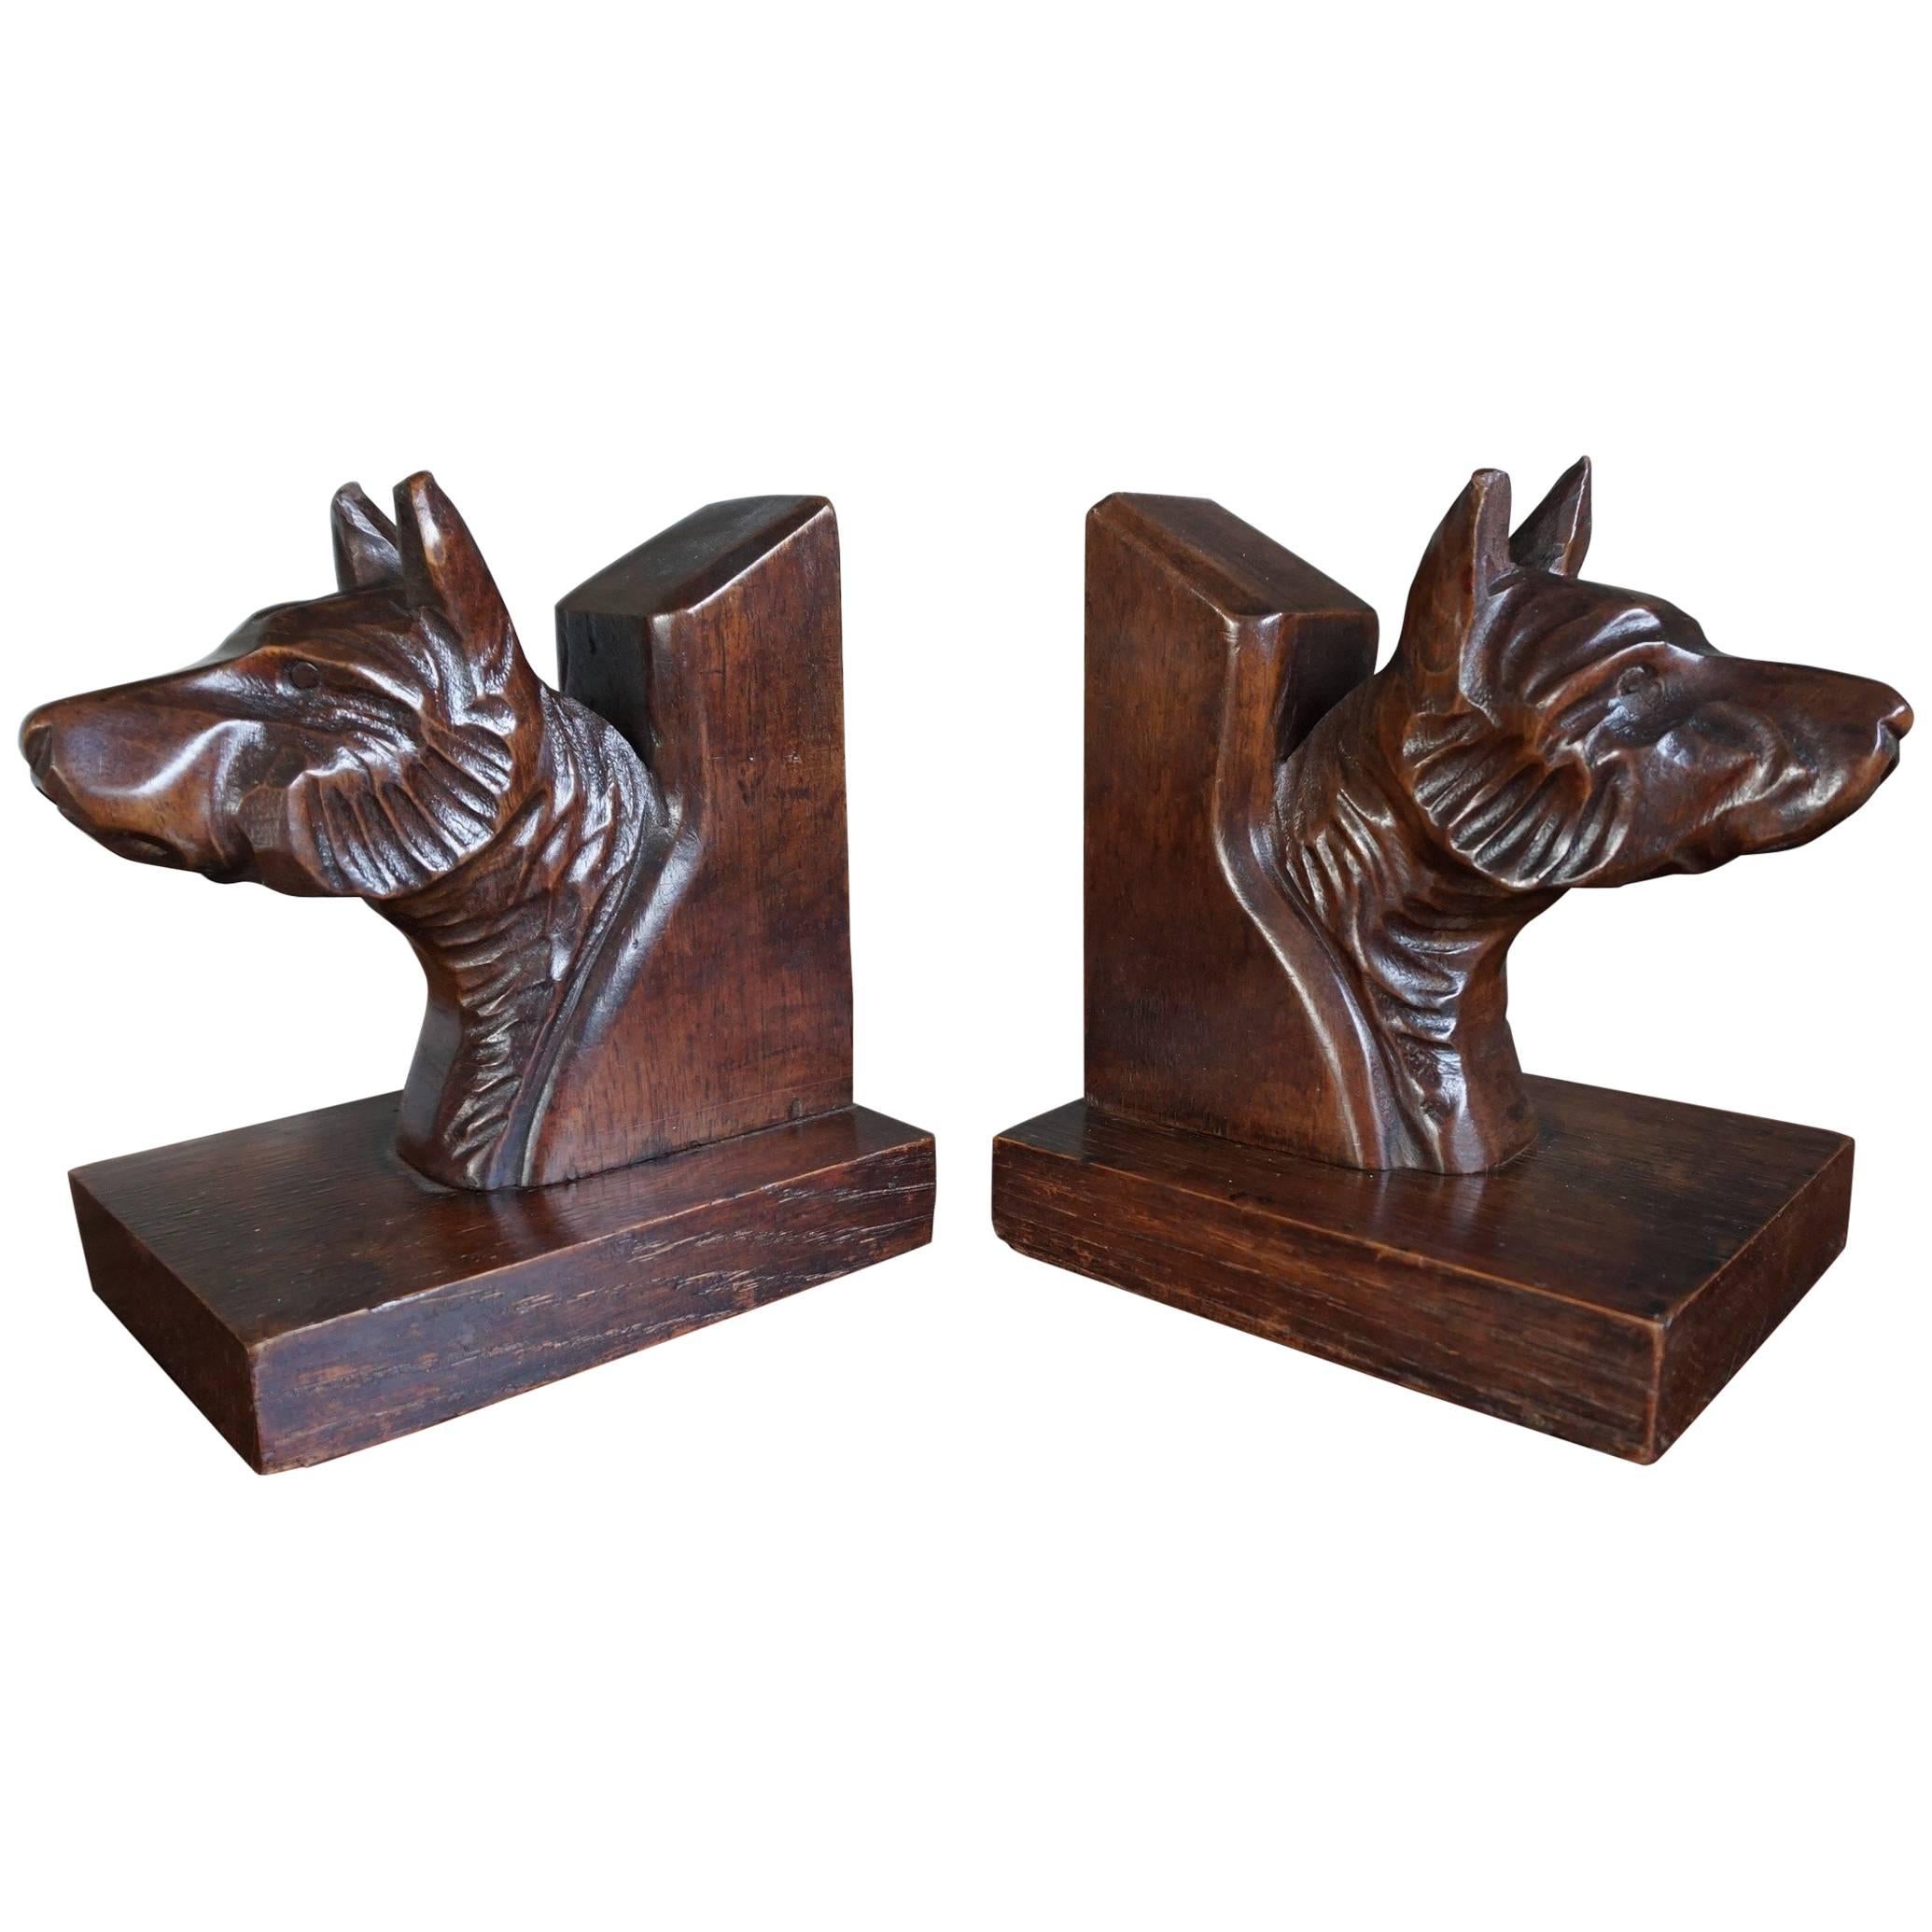 Early 20th Century Quality Carved Chestnut Dog Bust Bookends on an Oak Base For Sale